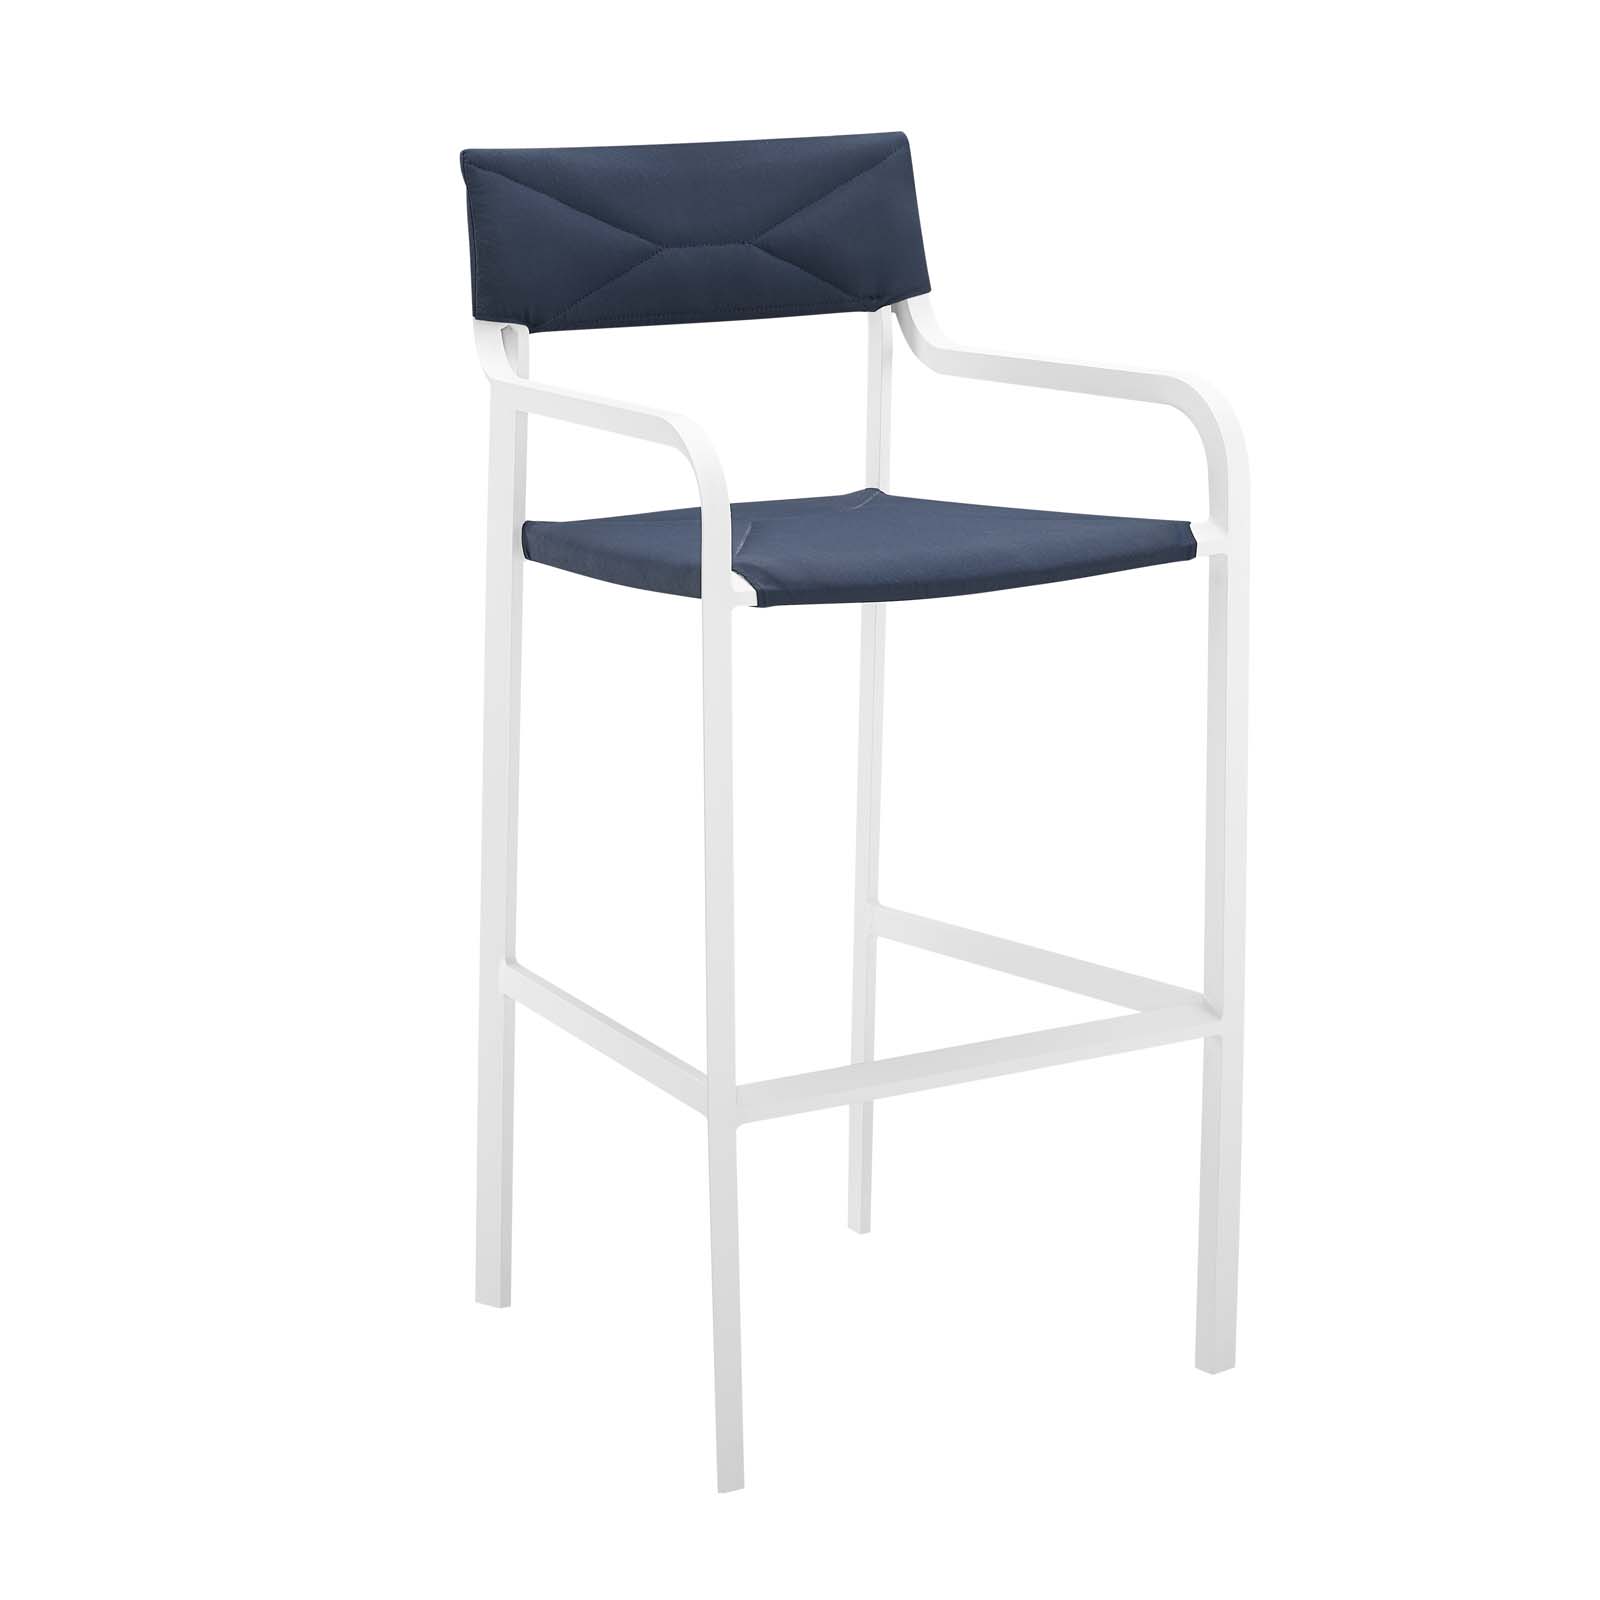 Modway Raleigh 3 Piece Outdoor Patio Aluminum Bar Set in White Navy - image 3 of 10